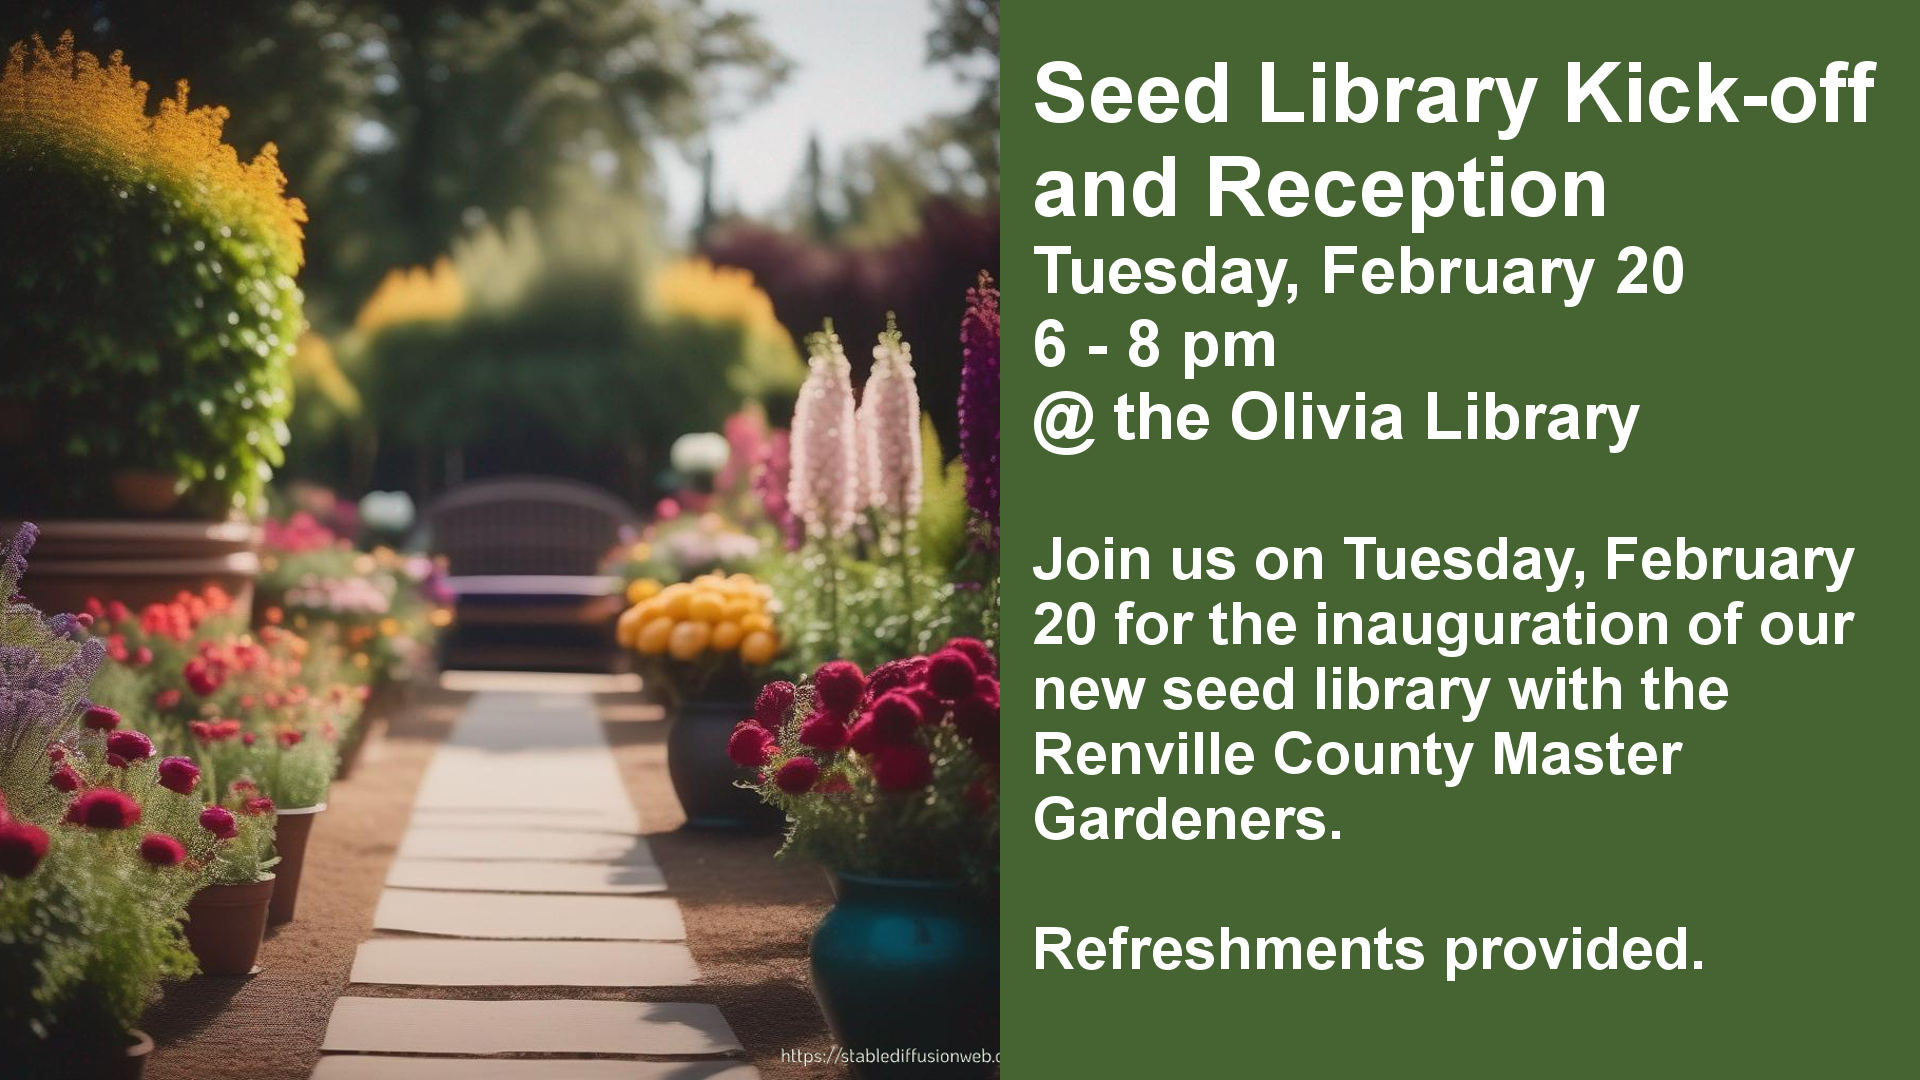 Seed Library Kick-off and Reception
Tuesday, February 20
6 - 8 pm
@ the Olivia Library

Join us on Tuesday, February 20 for the inauguration of our new seed library with the Renville County Master Gardeners.

Refreshments provided.